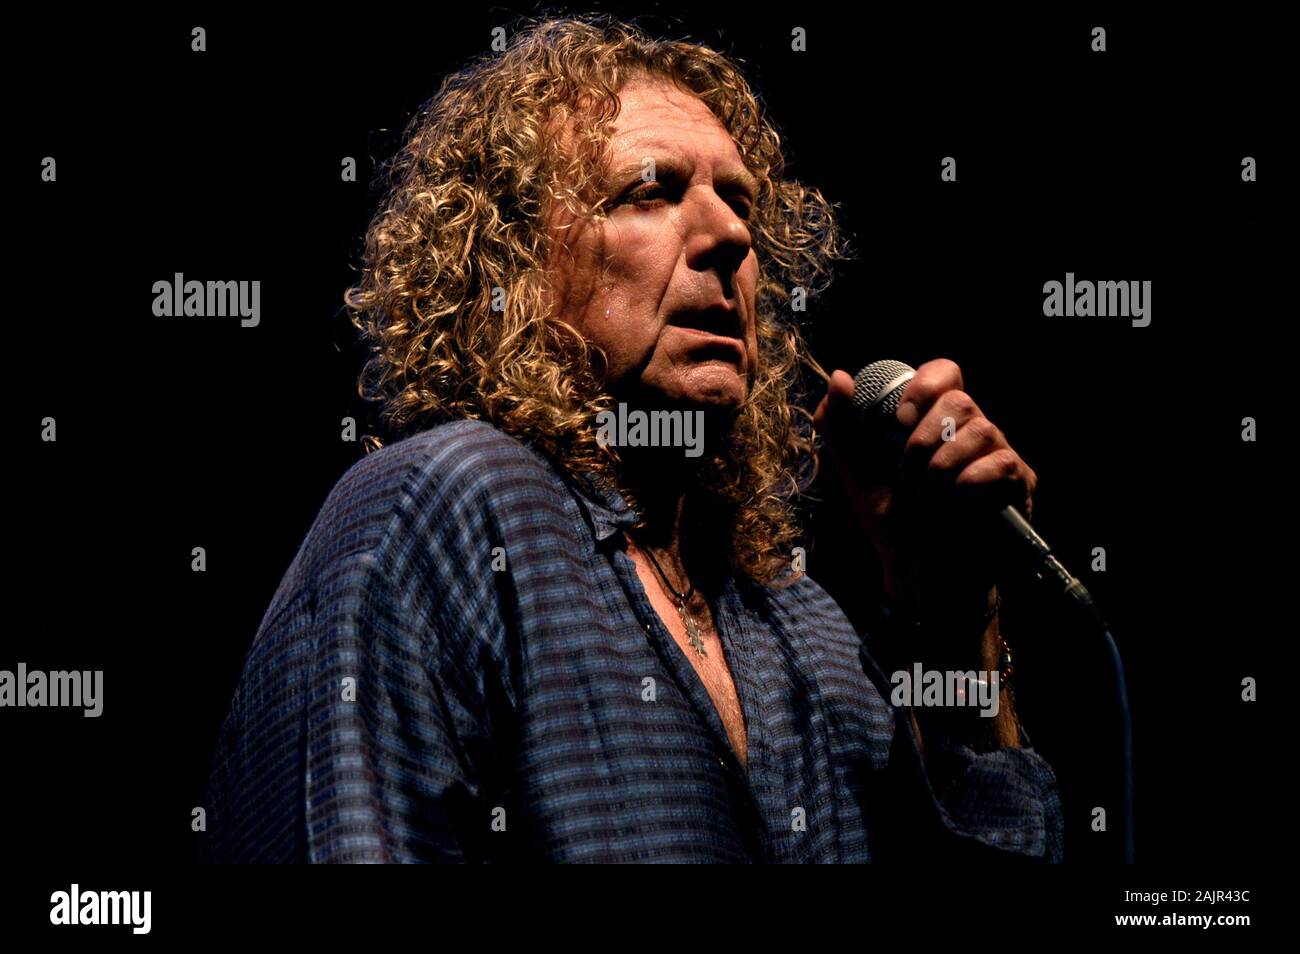 Milan Italy, 11 July 2003, live concert of Robert Plant ,Dreamland Tour 2003 the Madzapalace: The singer Robert Plant during the concert Stock Photo - Alamy